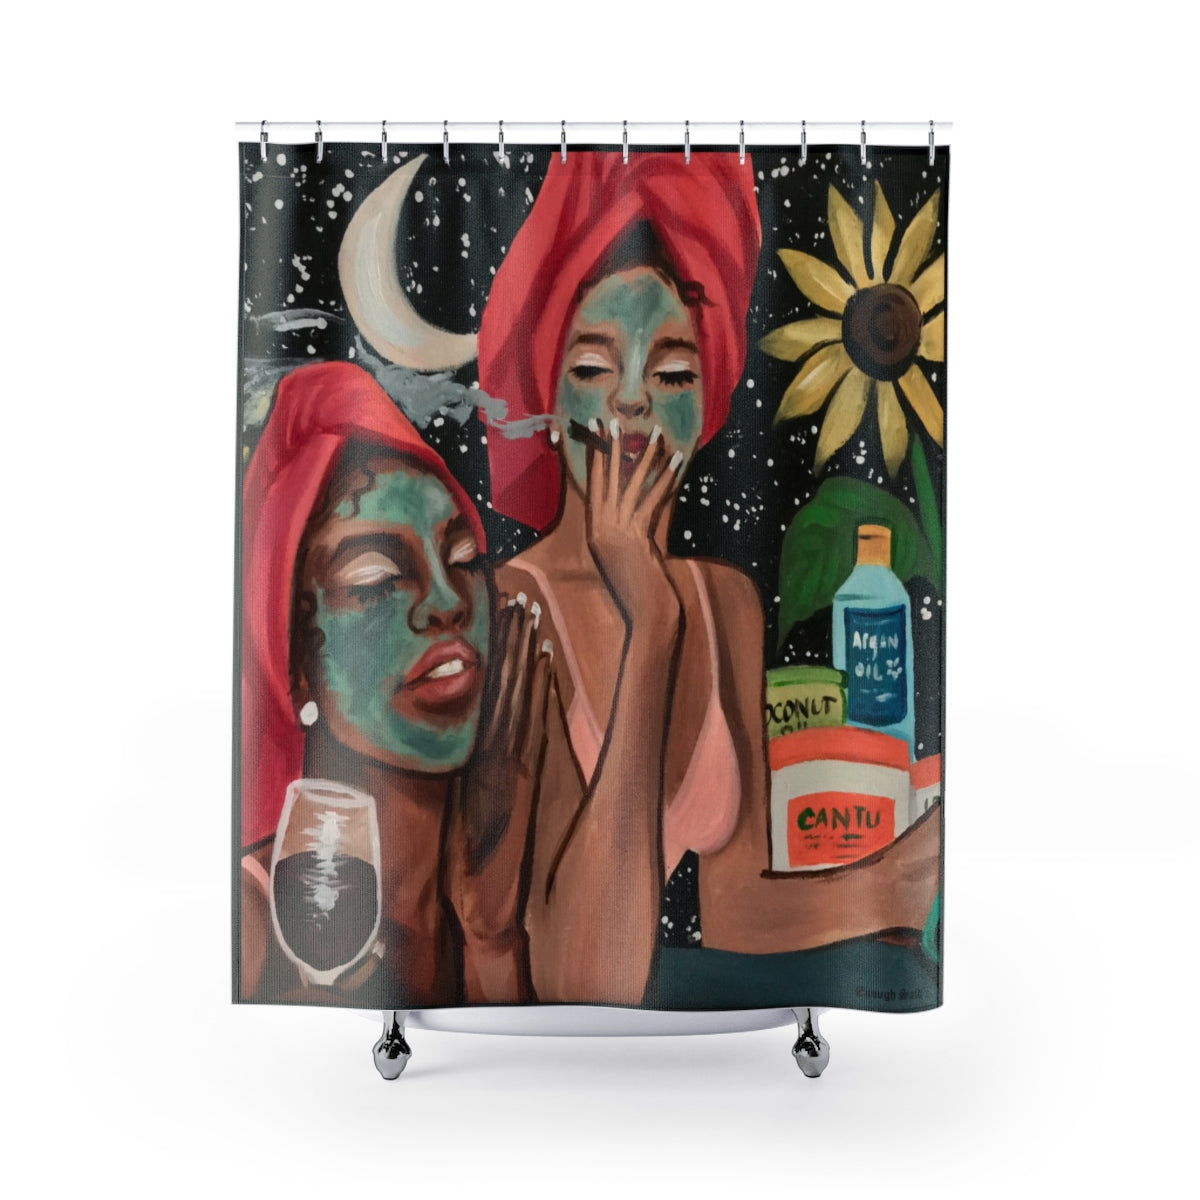 Shower Curtain / Wall Tapestry - Essence of Women